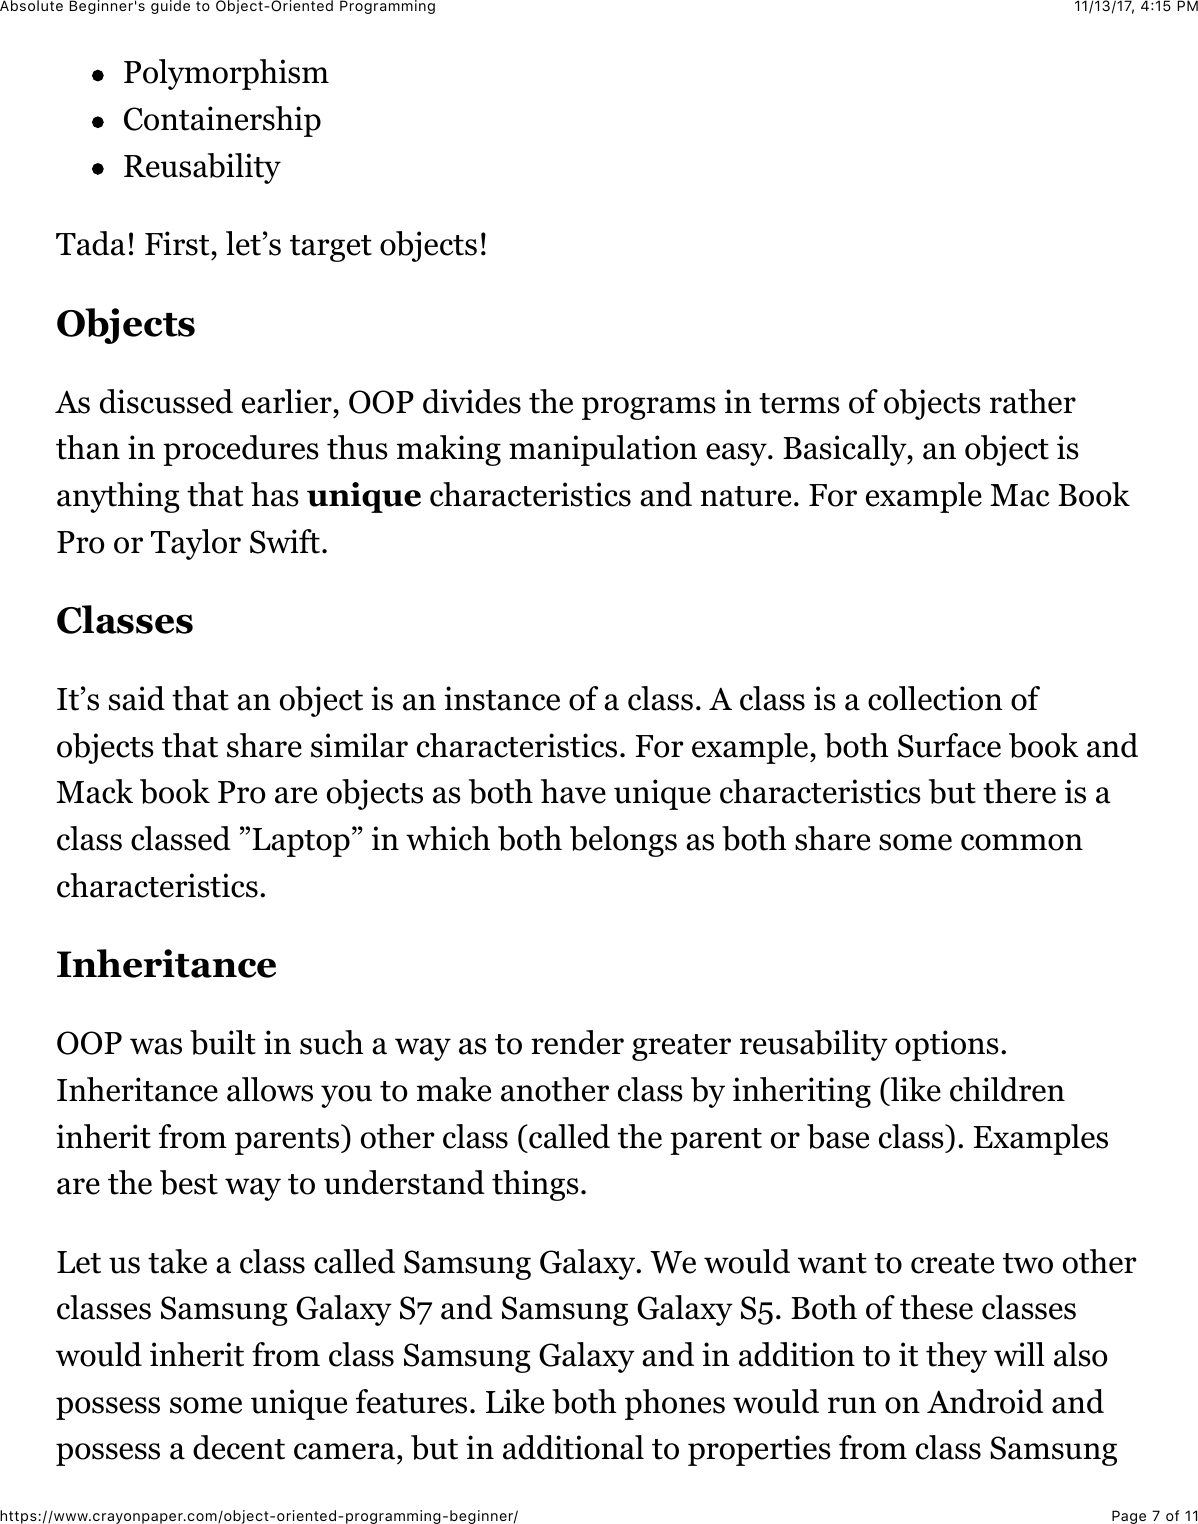 Page 7 of 11 - Absolute Beginner's Guide To Object-Oriented Programming